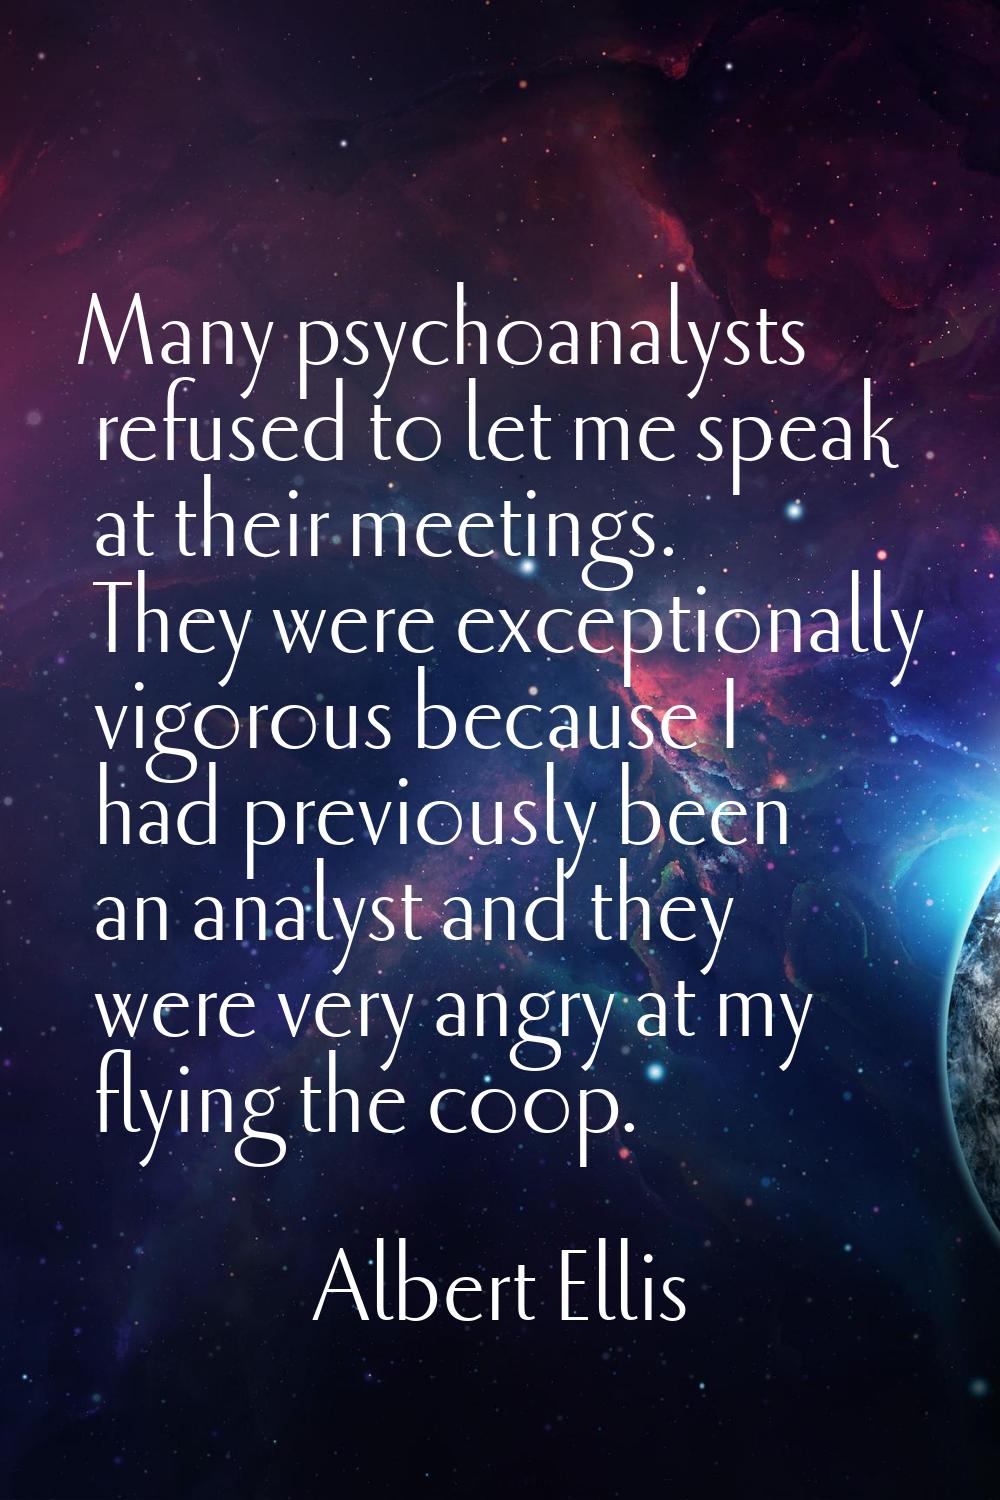 Many psychoanalysts refused to let me speak at their meetings. They were exceptionally vigorous bec